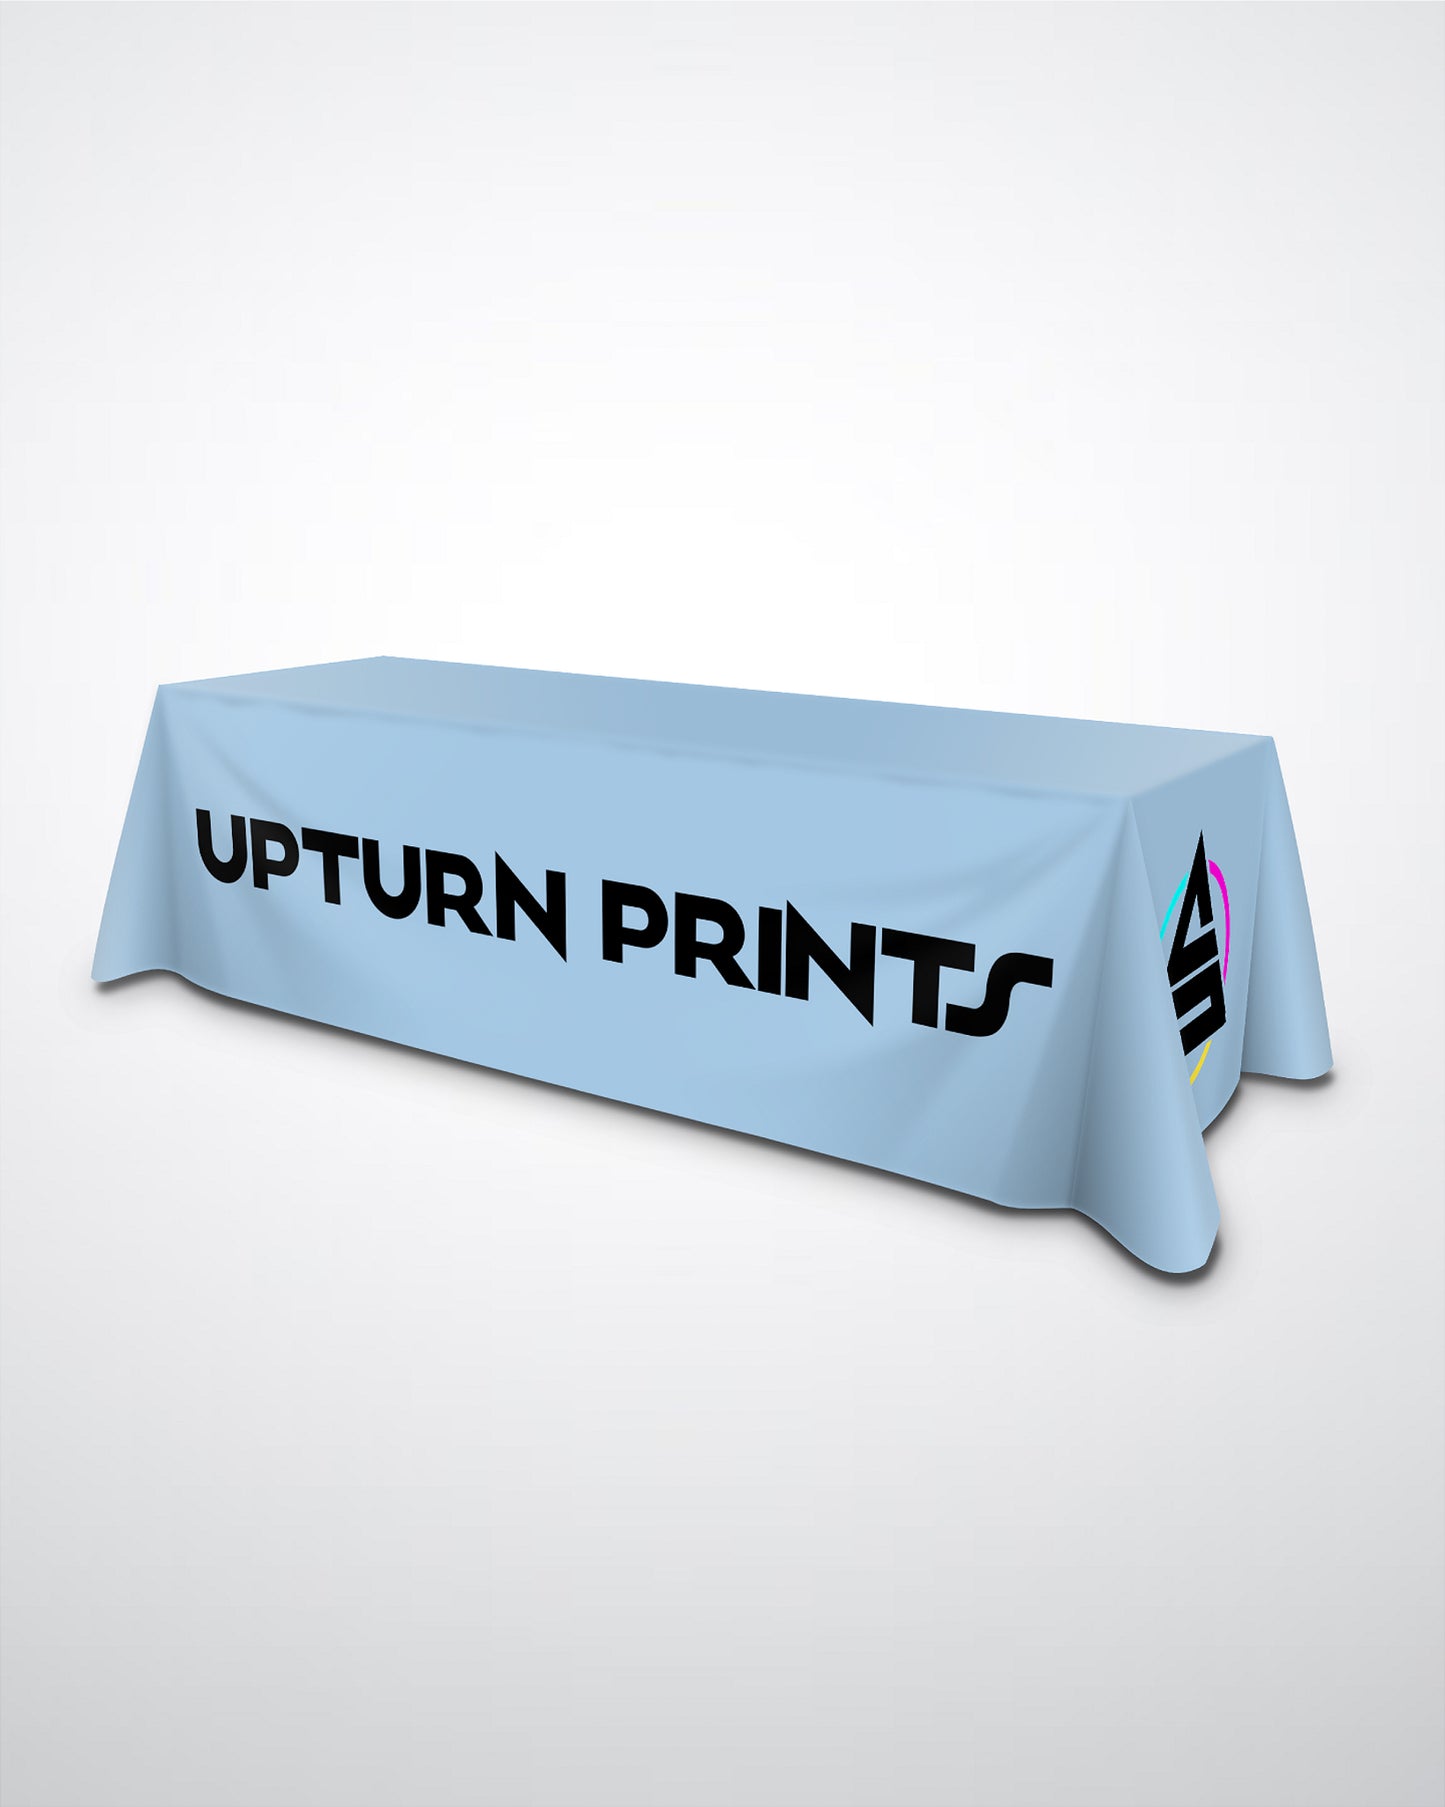 fully customizable 6 or 8 feet table cover throw with logo print and design